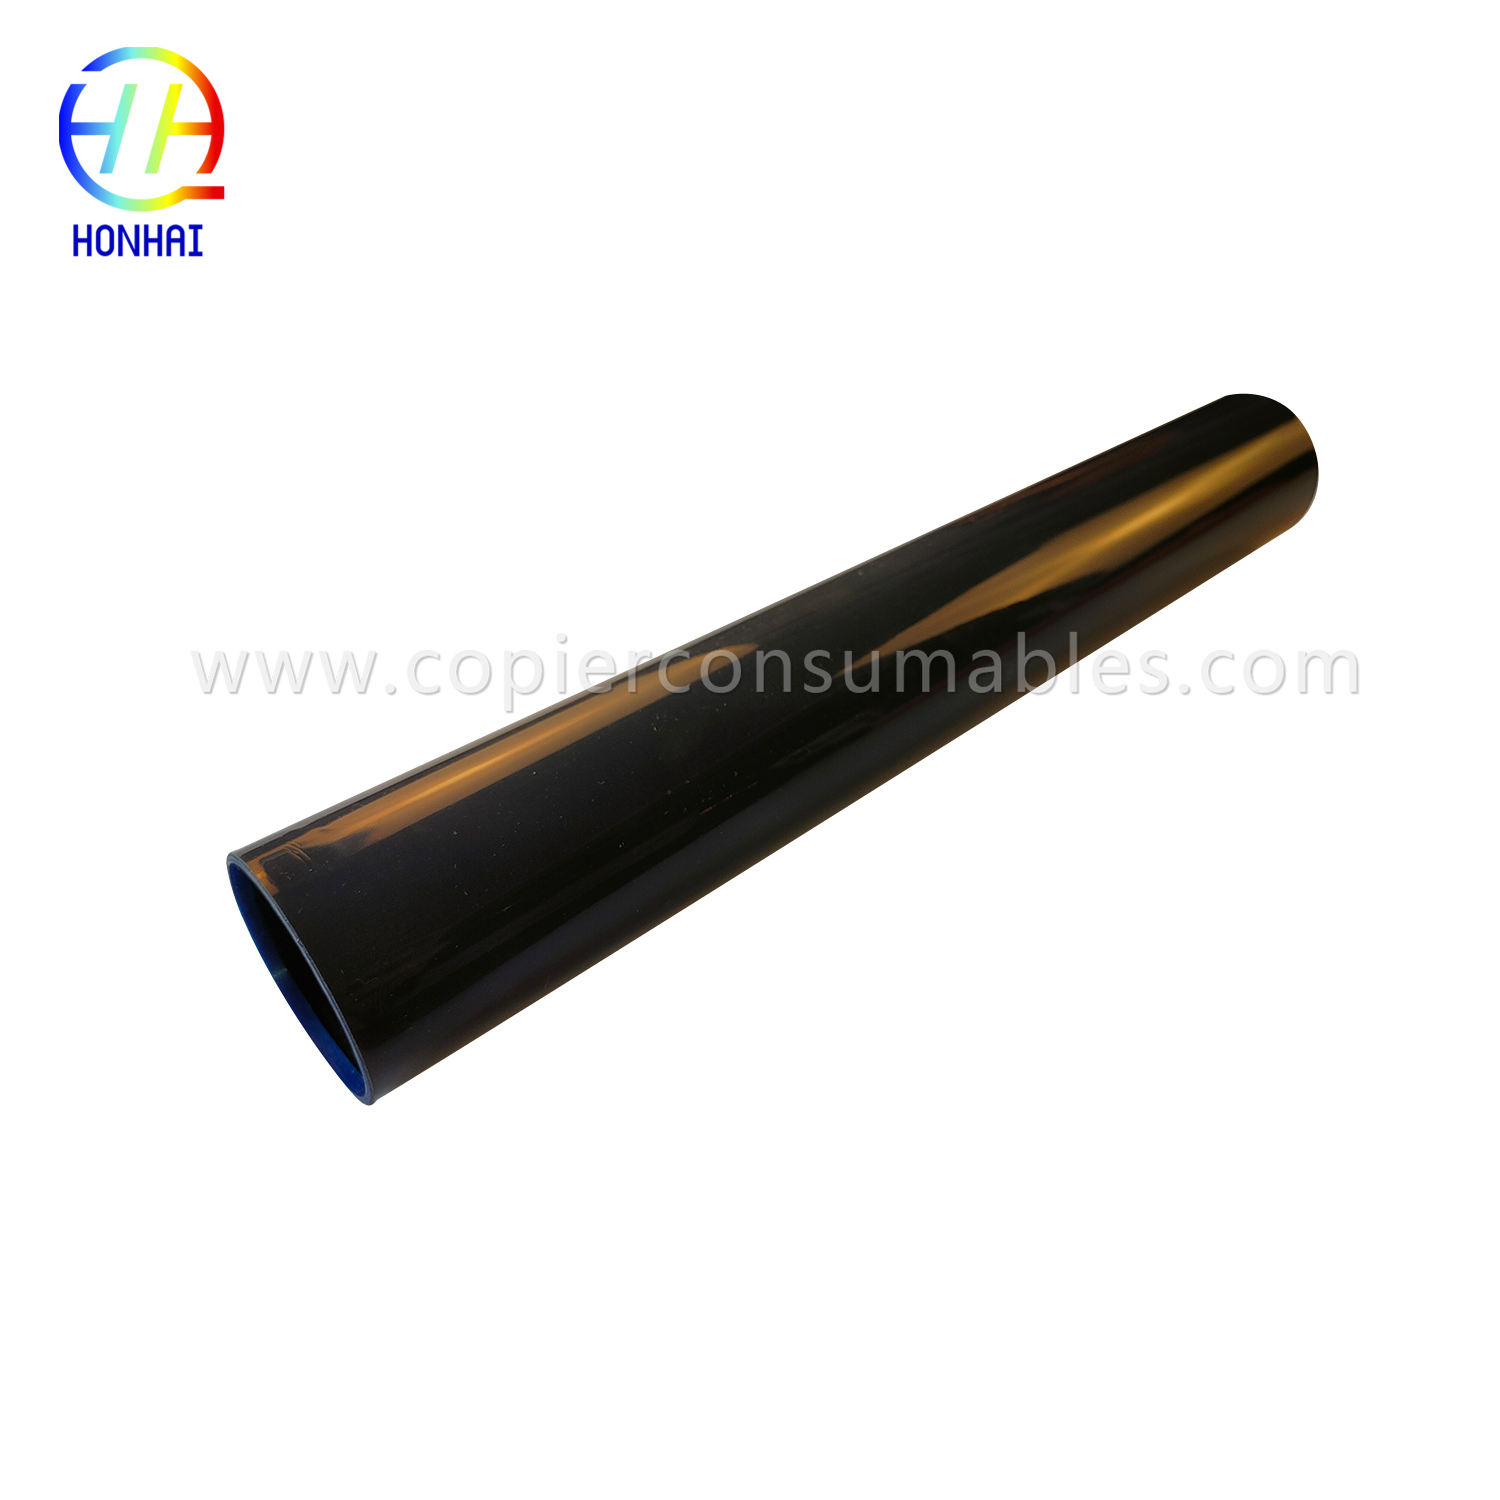 Fuser Film Sleeve for Ricoh MPC2050